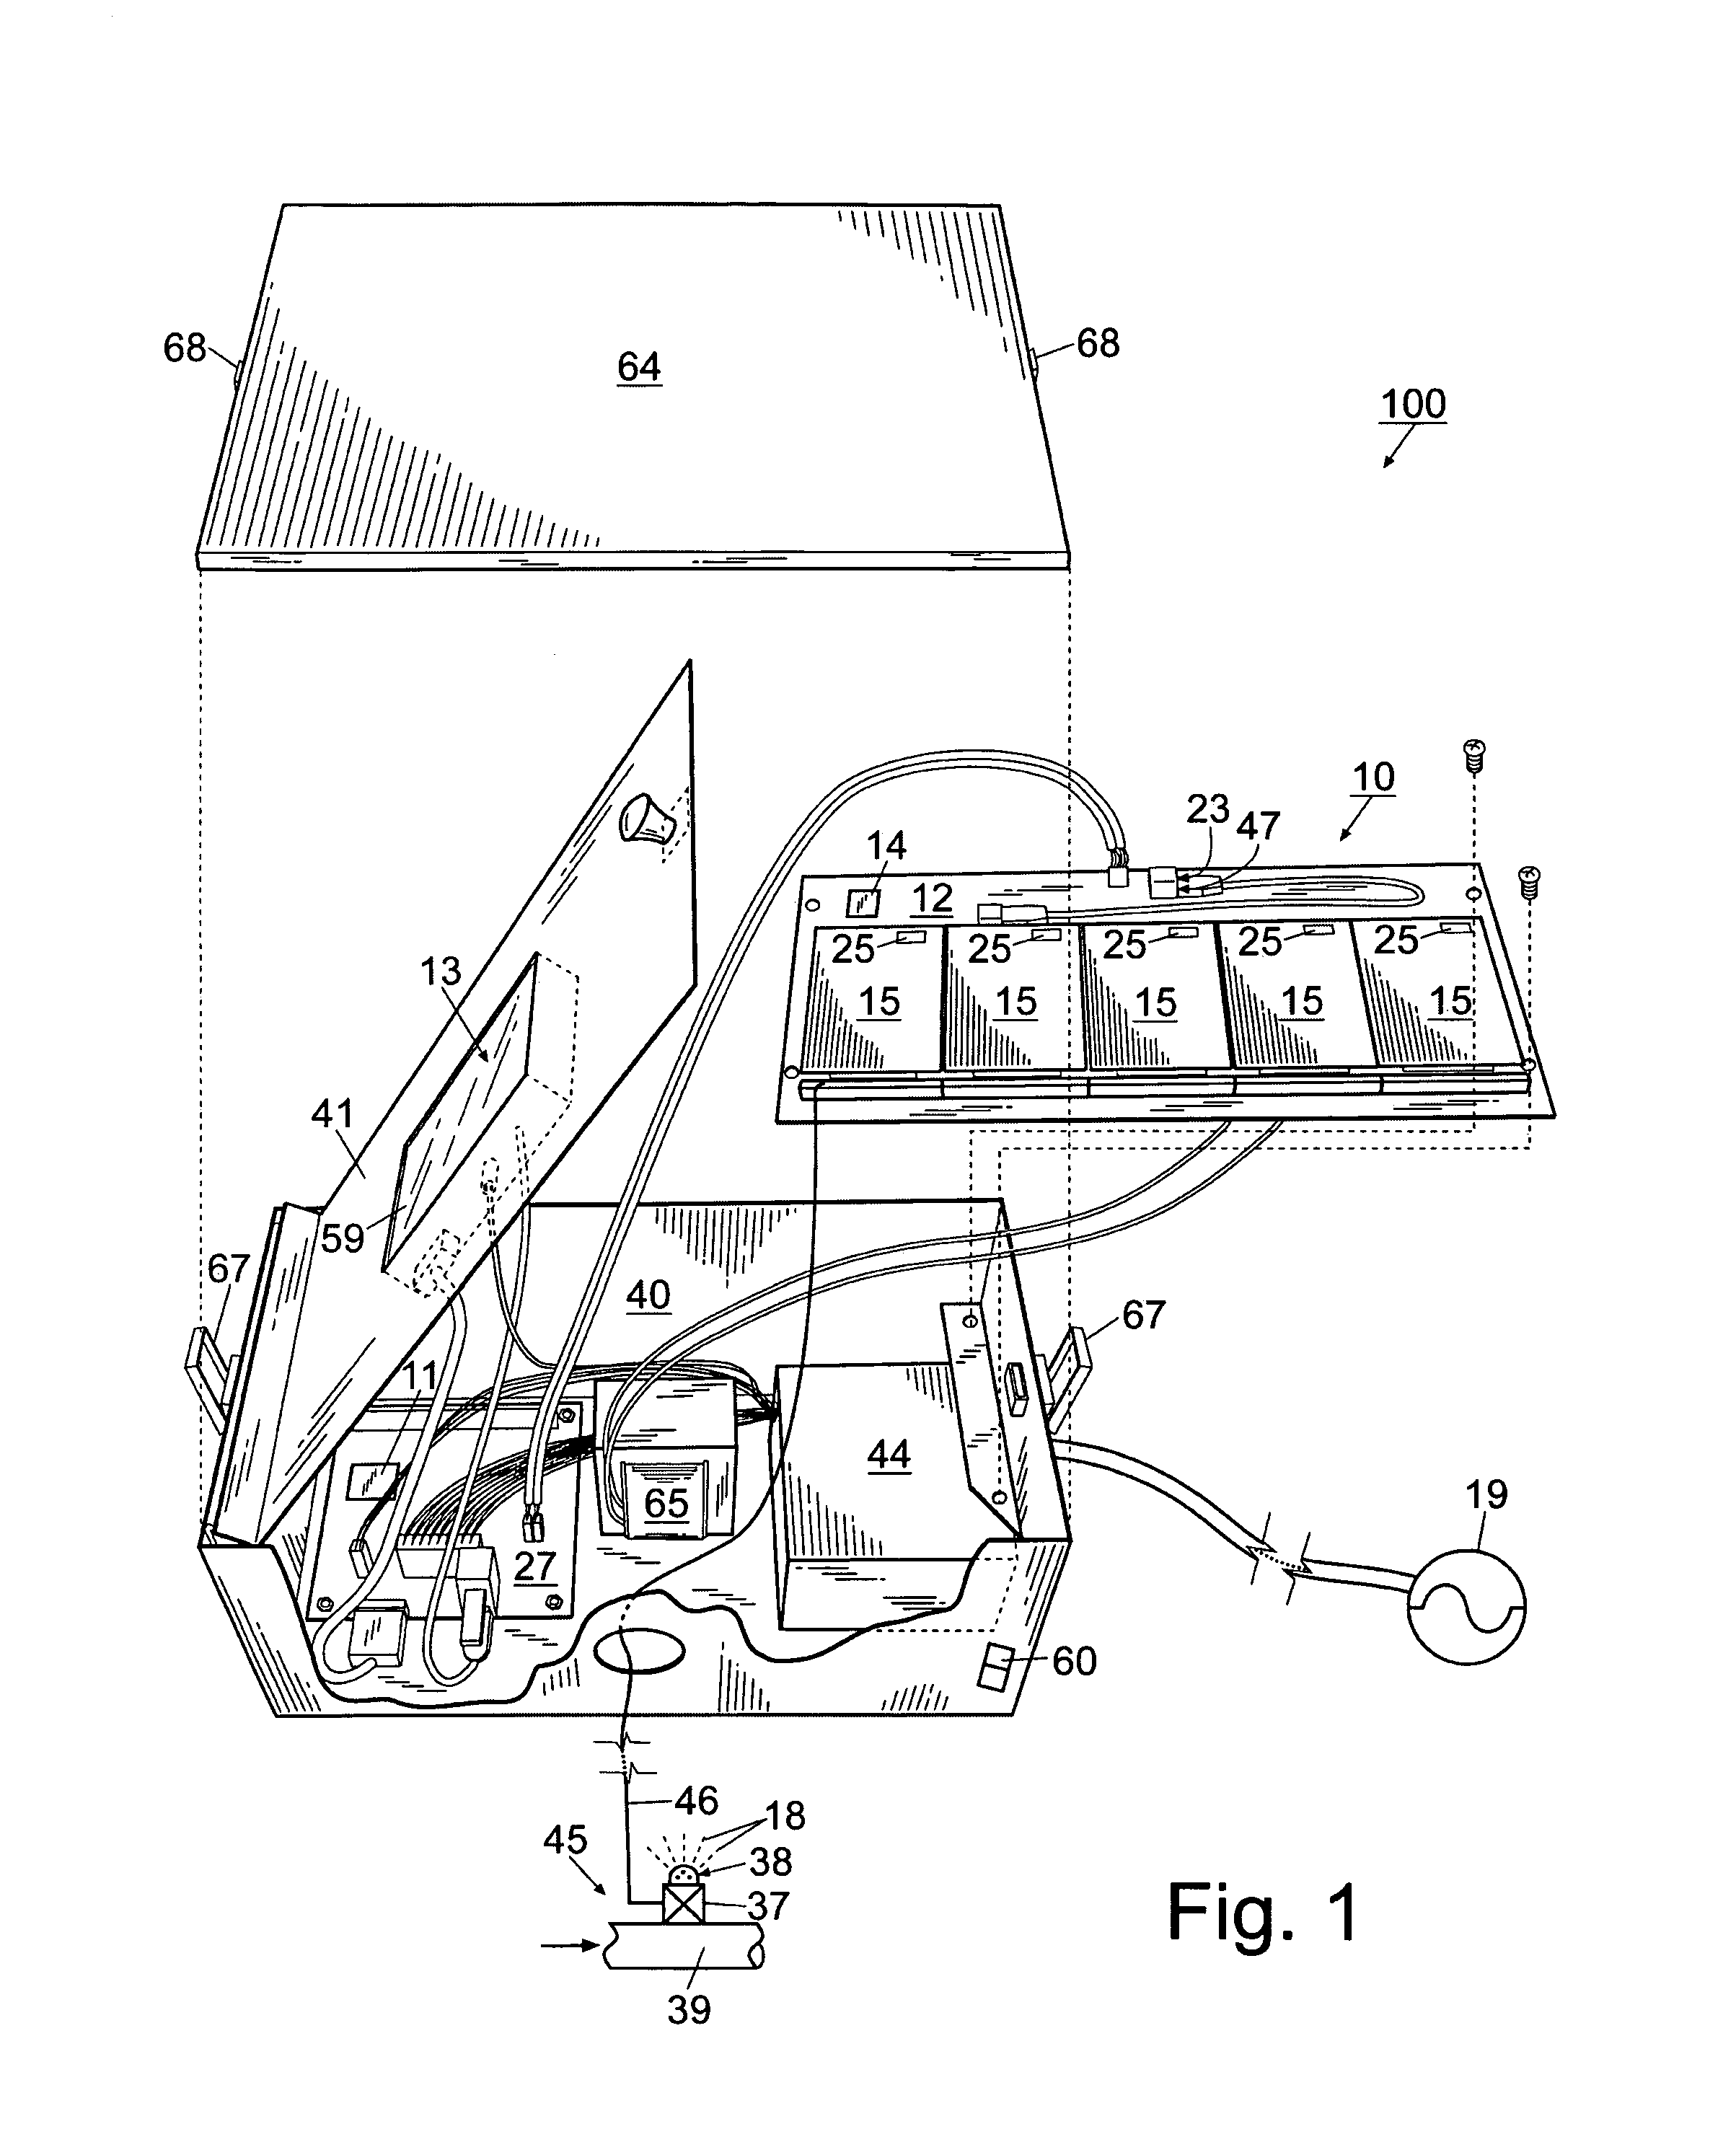 Irrigation control system and method